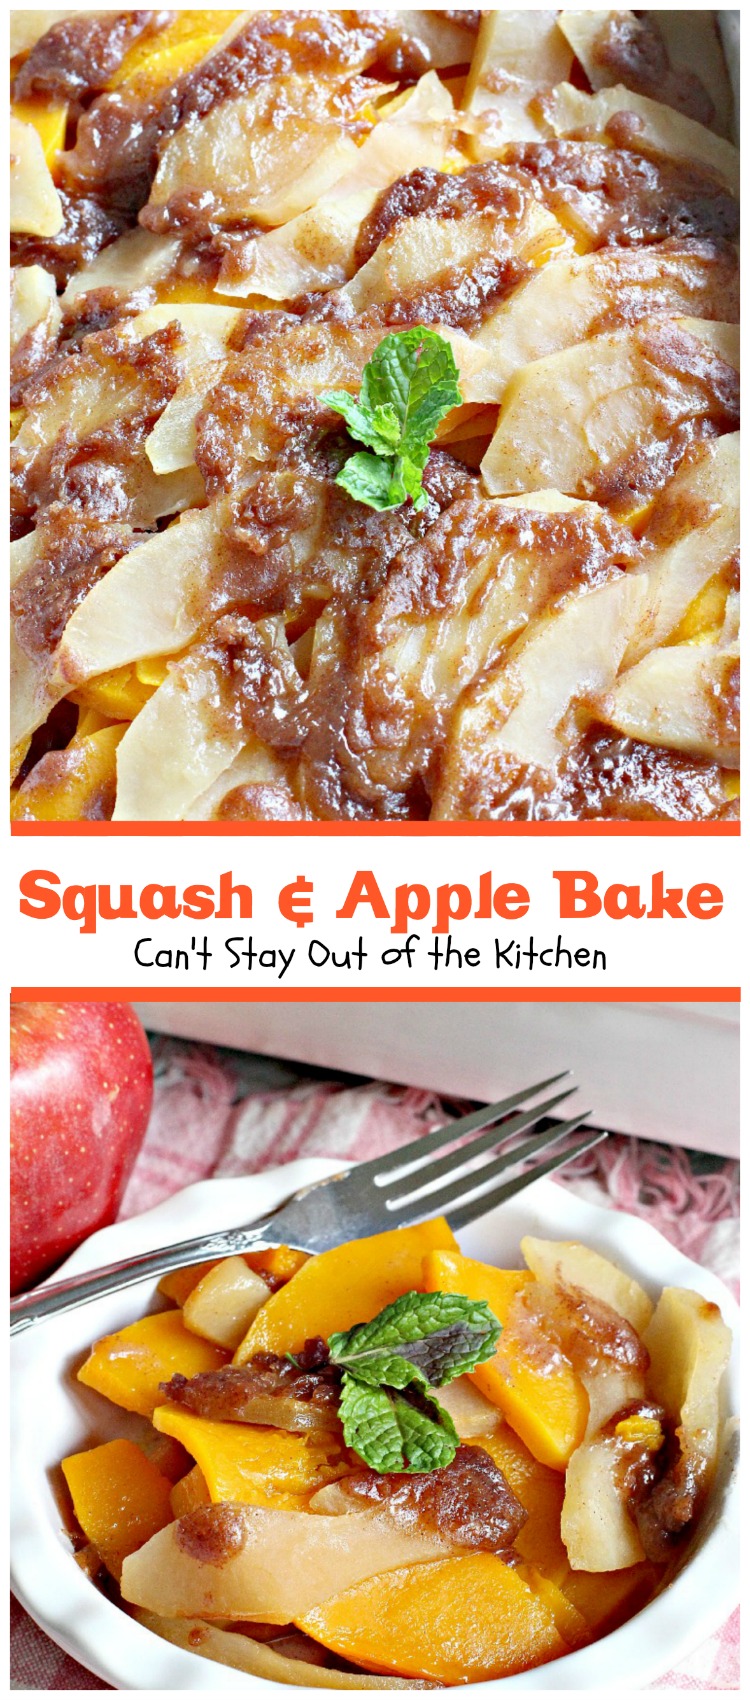 Squash and Apple Bake | Can't Stay Out of the Kitchen